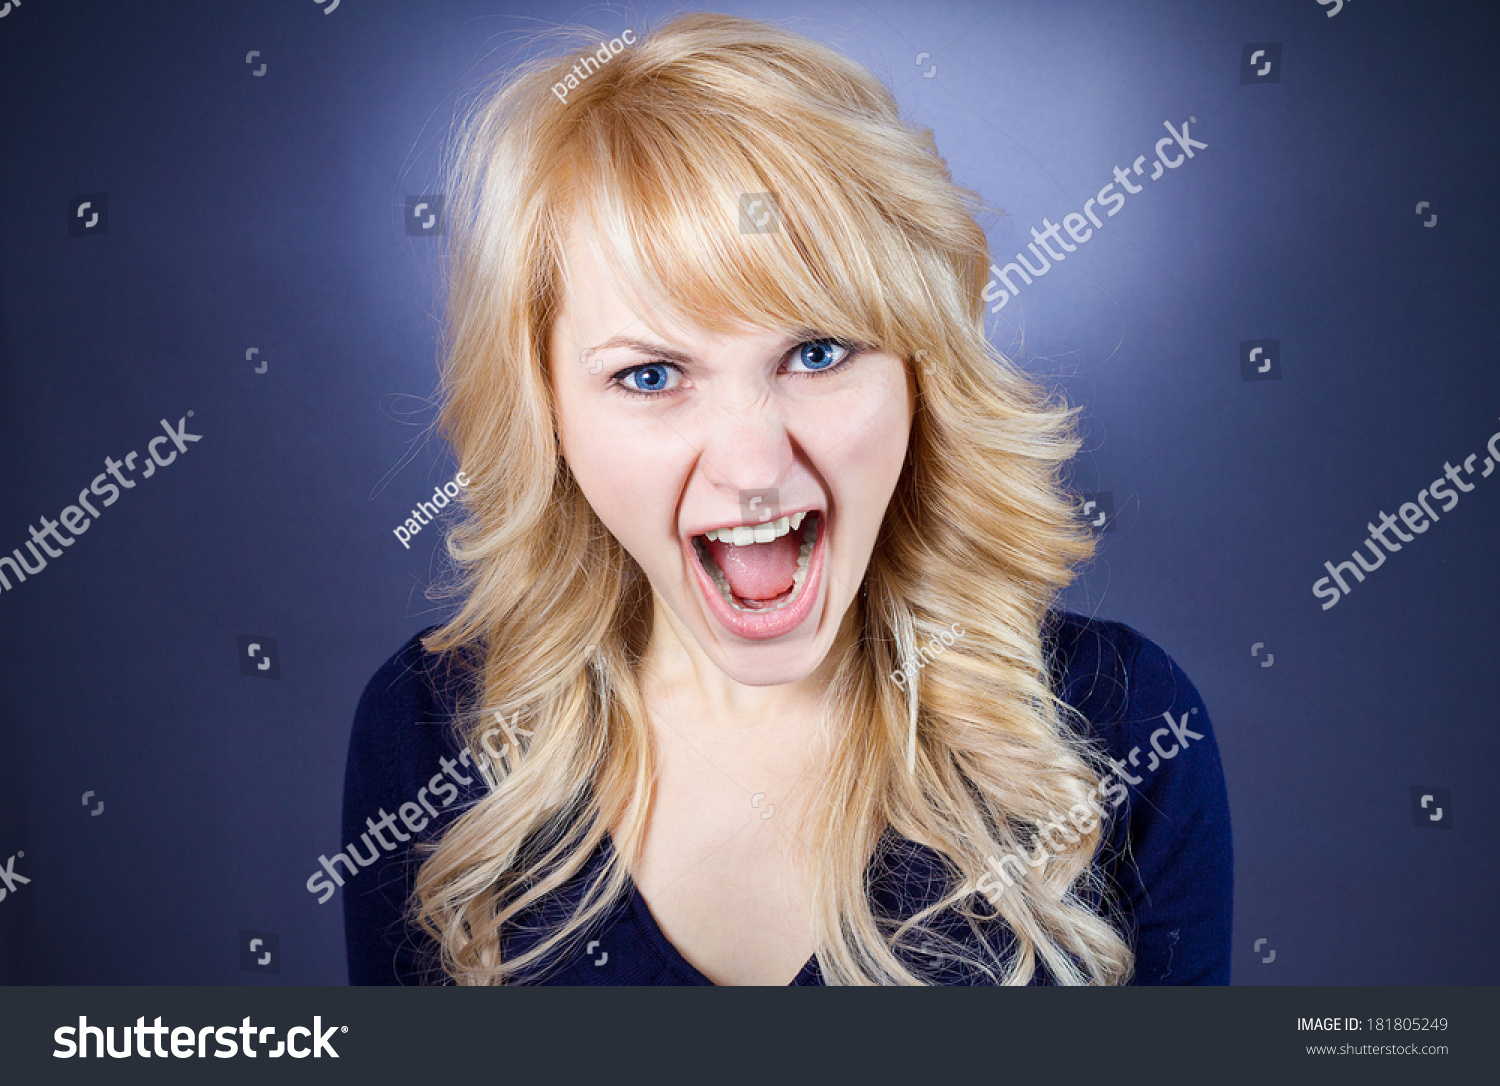 Closeup Portrait Angry Pissed Off Upset Foto Stock 181805249 Shutterstock